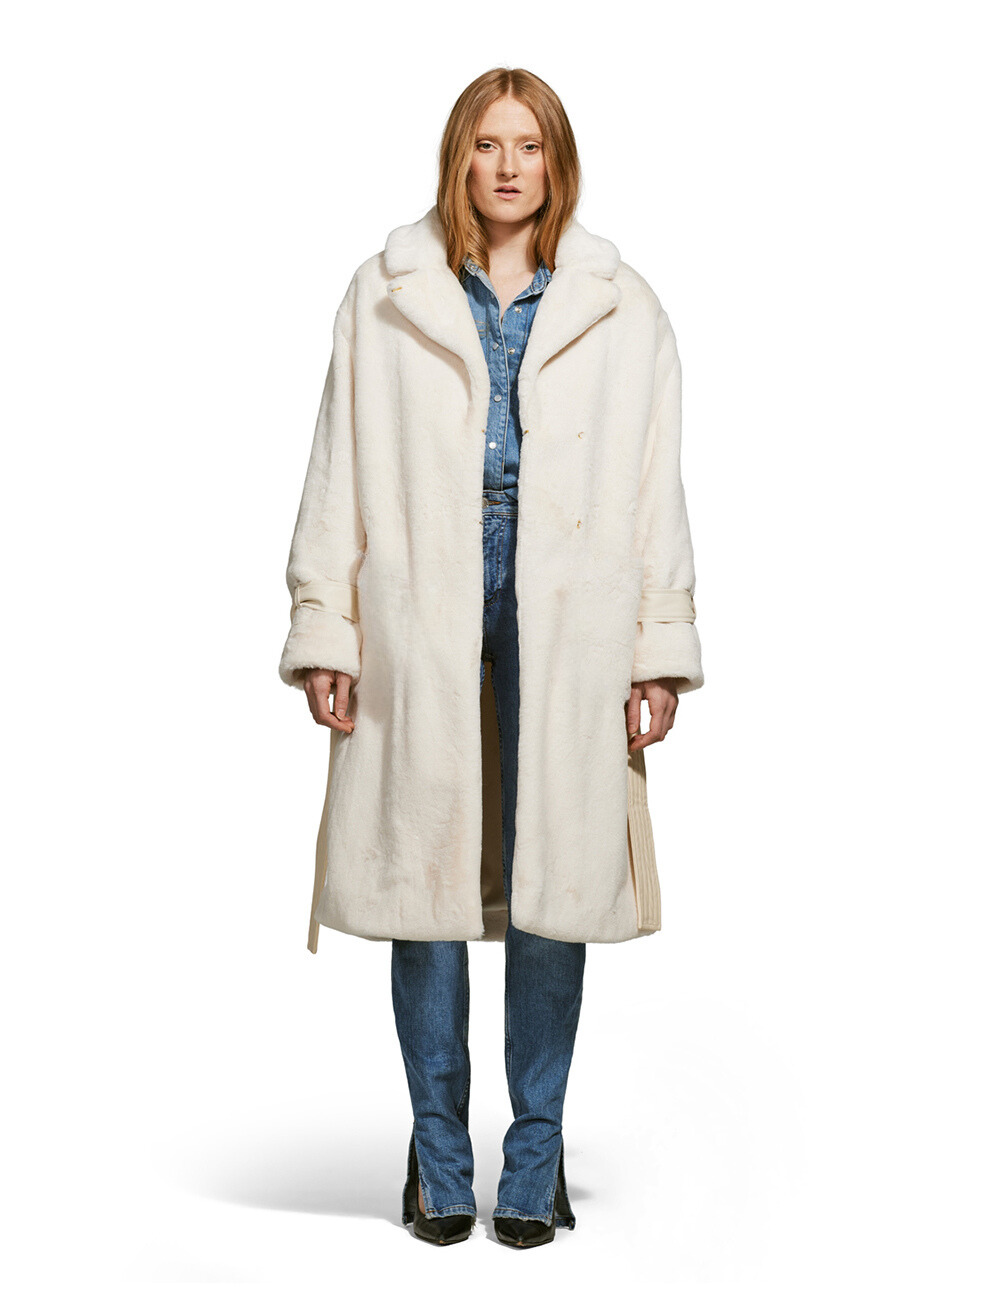 Violet White Cream Ethical Faux Fur Long Coat Cold Weather Made in Canada Vegan Leather